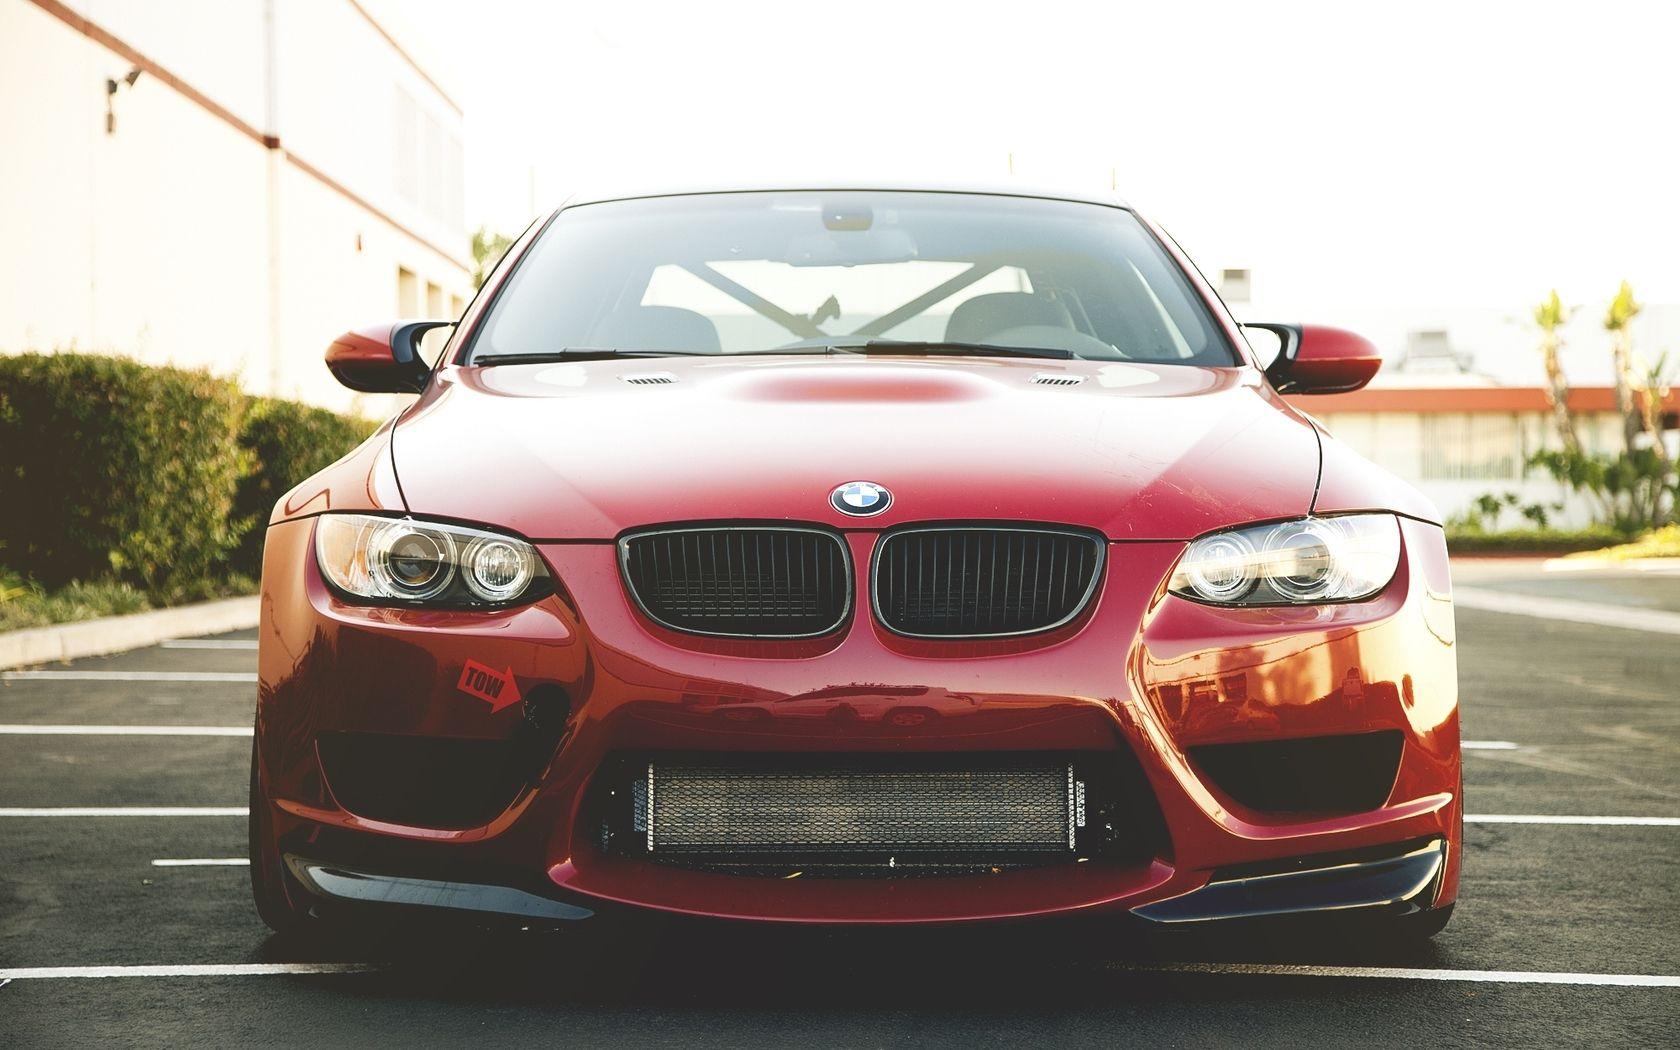 BMW image BMW M3 HD wallpaper and background photo